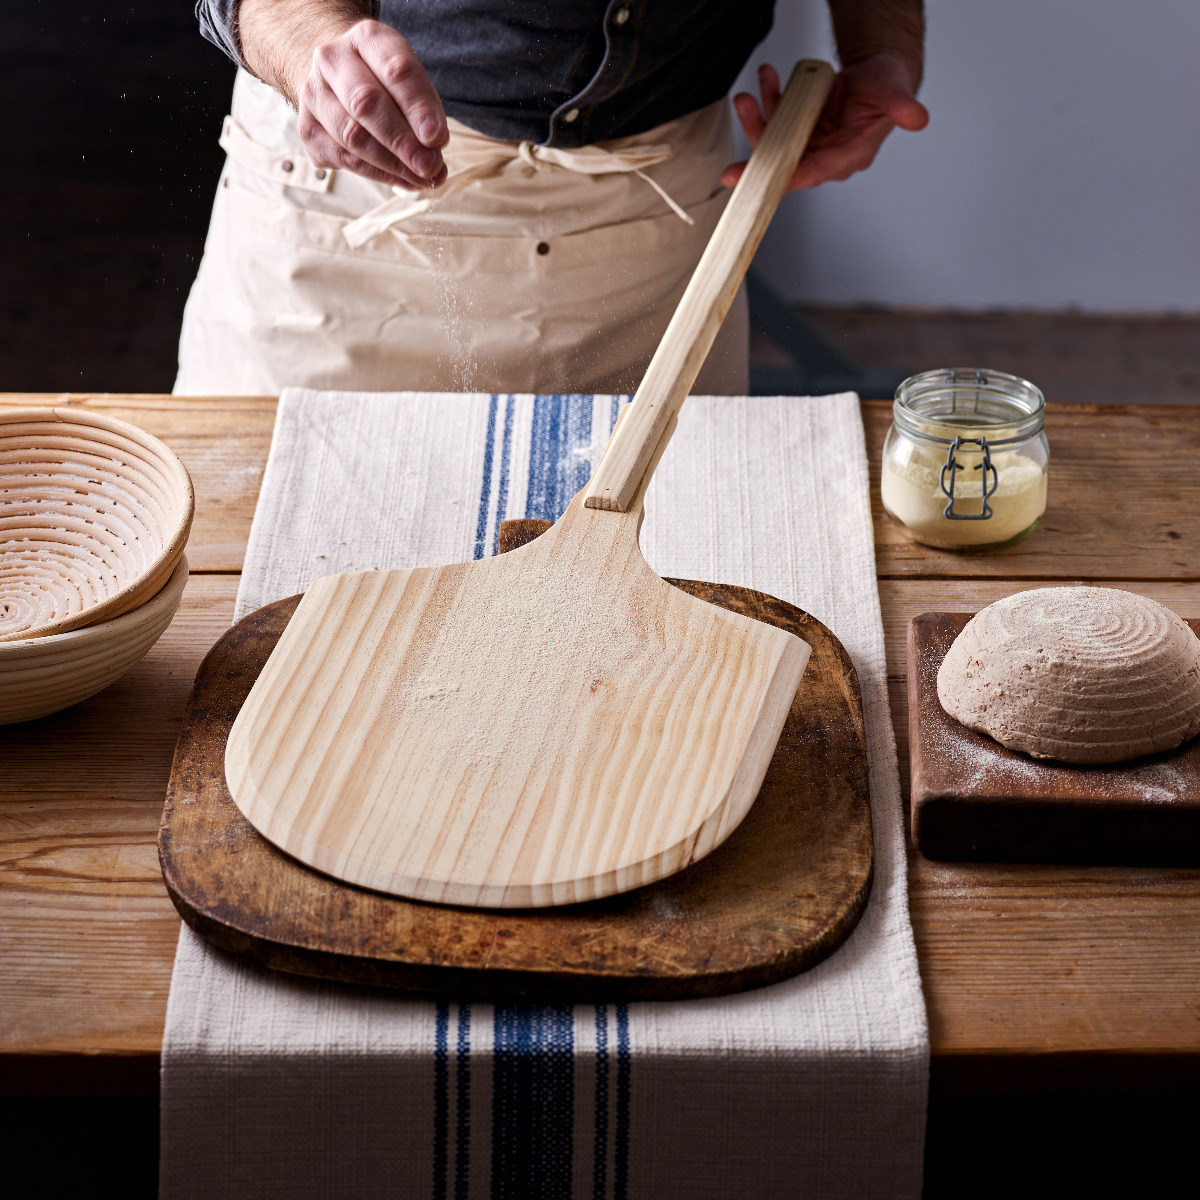 Wooden Bread or Pizza Peel or Paddle, 30cm wide